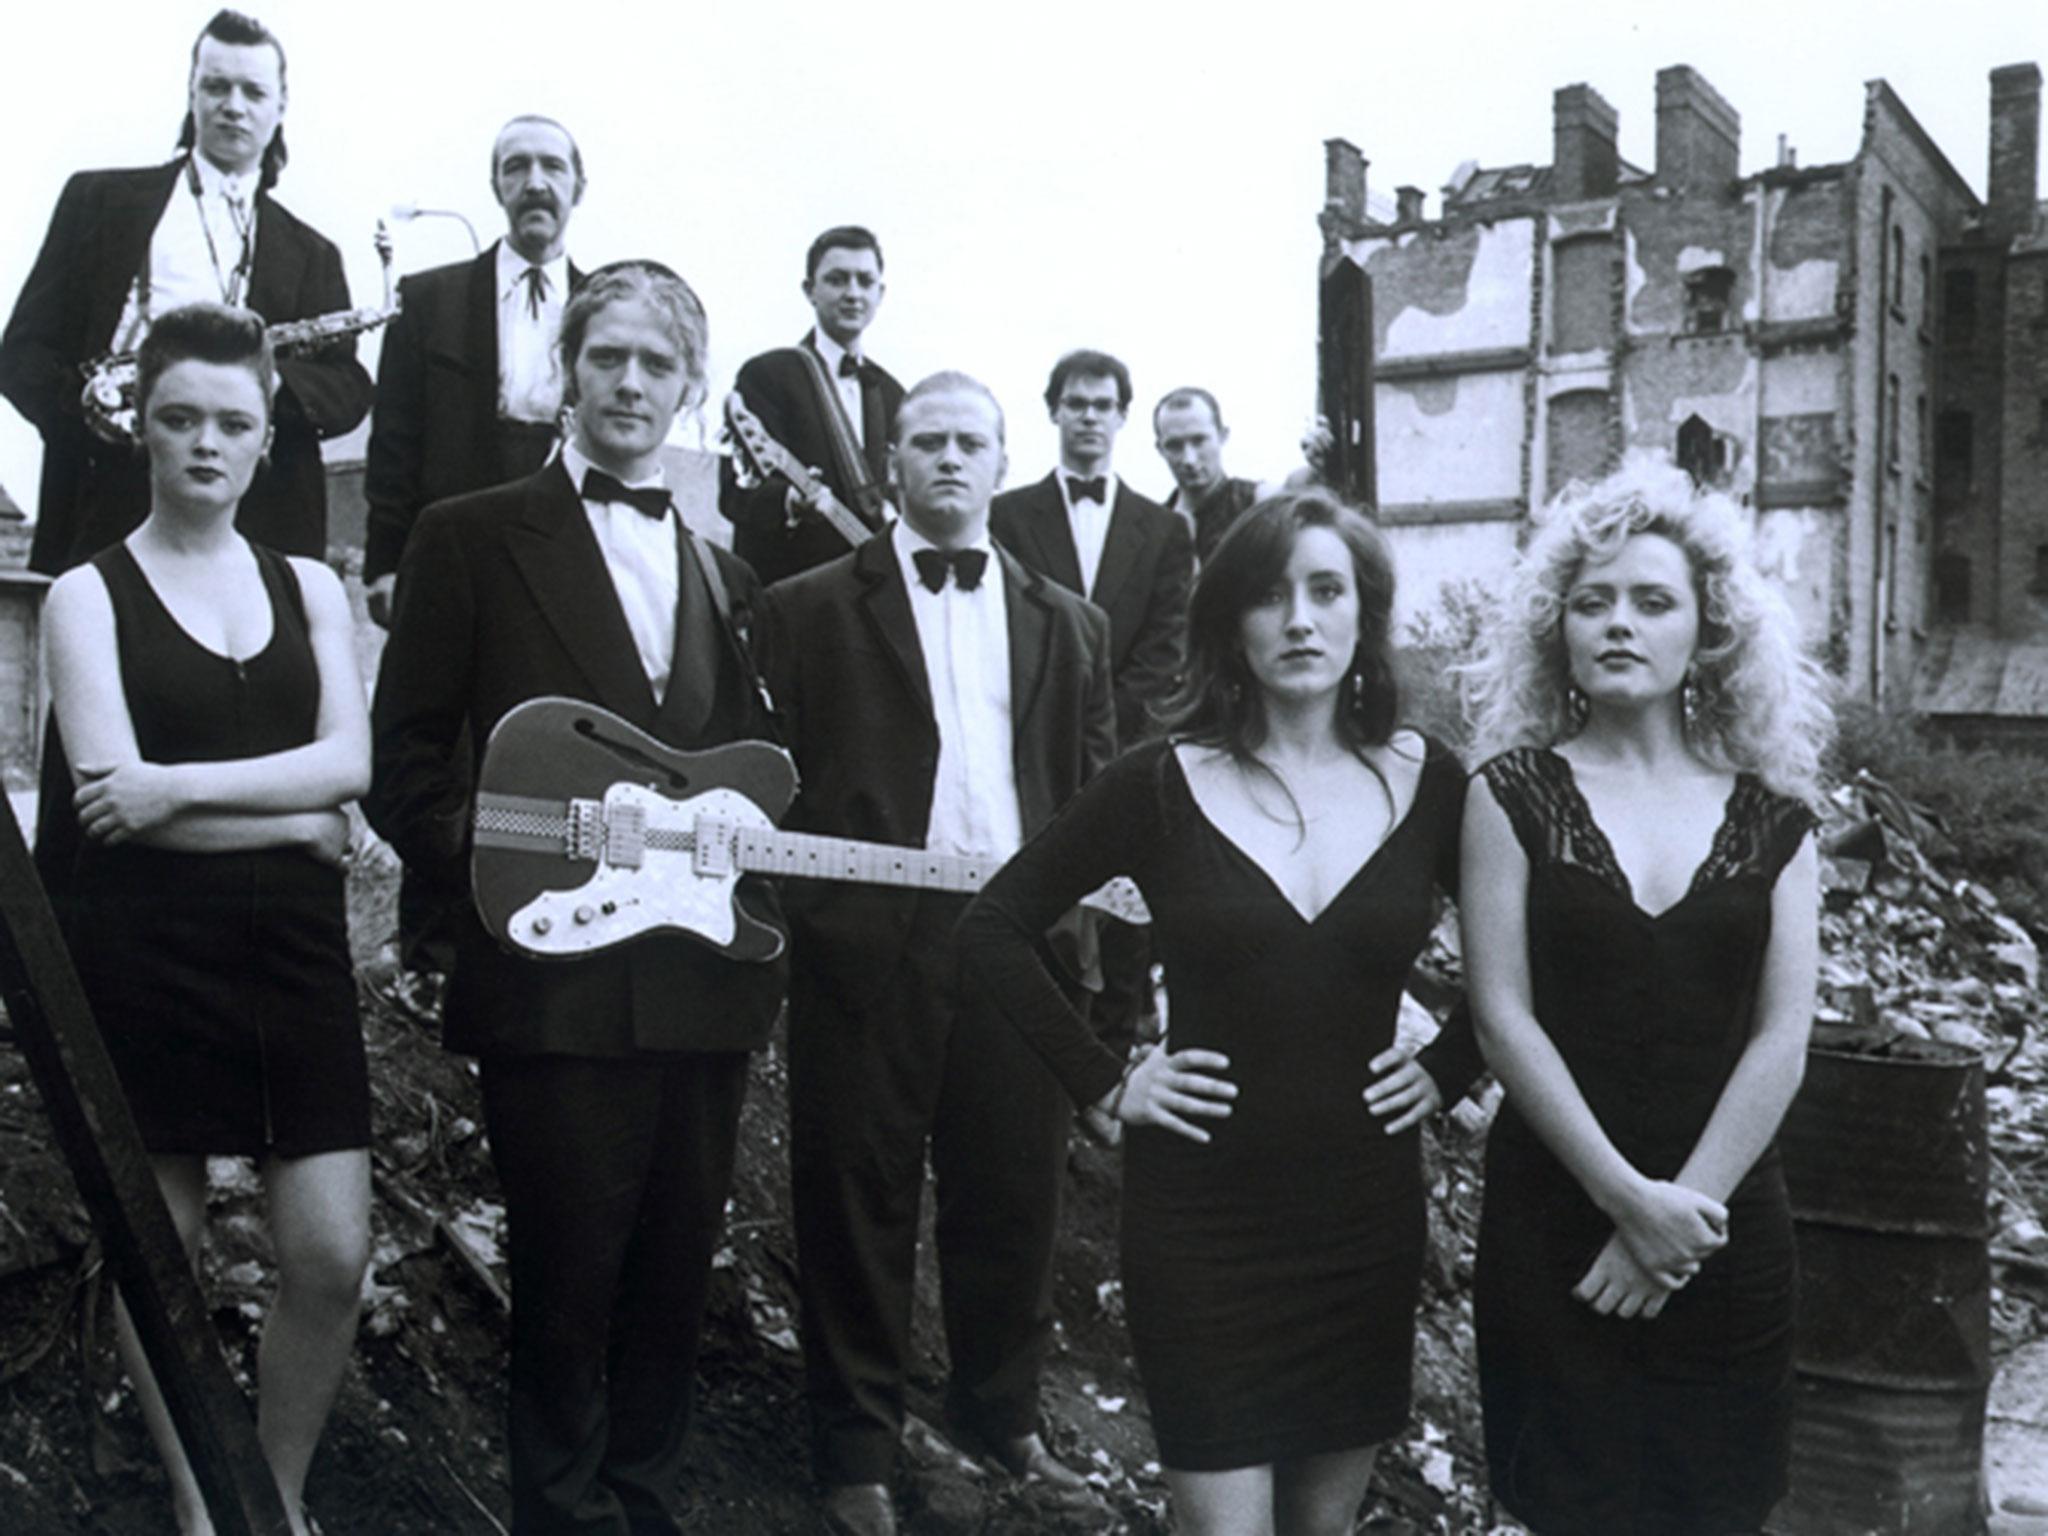 Hansard, with guitar, in ‘The Commitments'